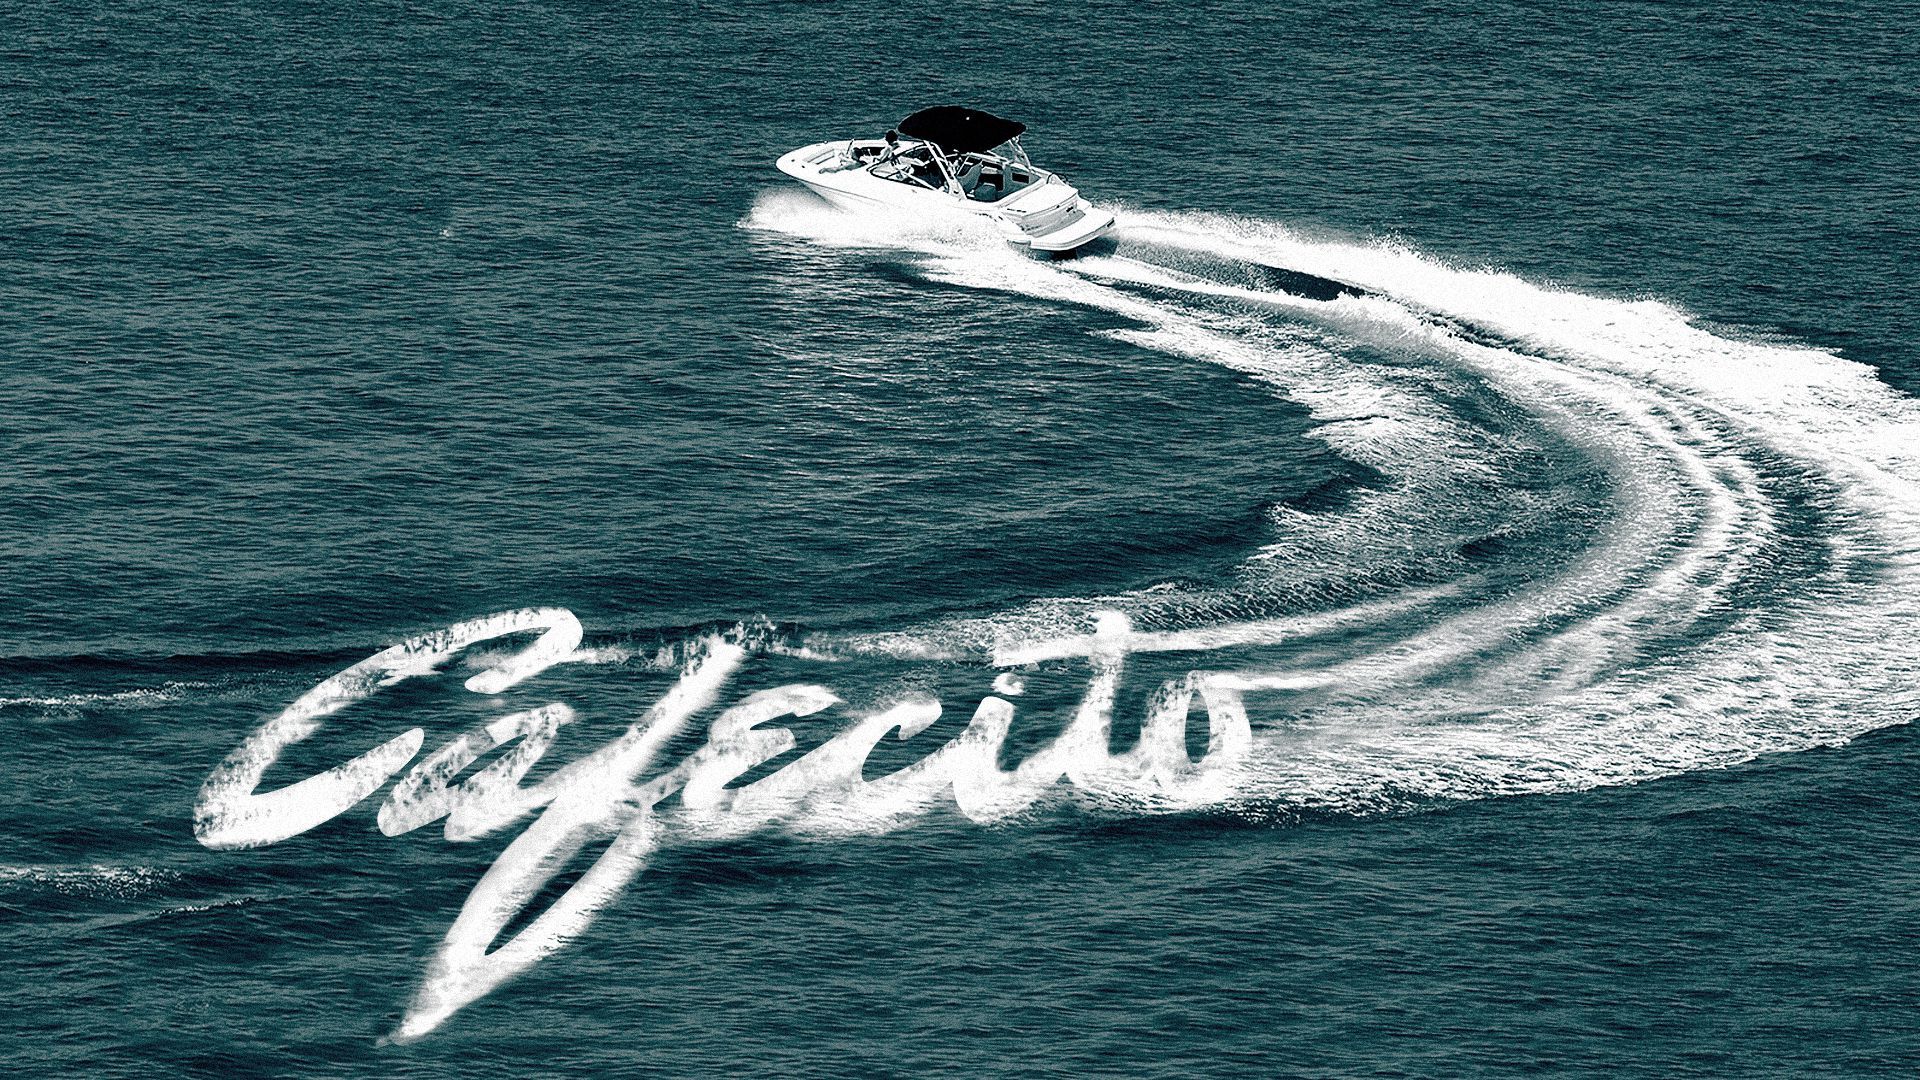 Illustration of  "Cafecito" spelled out in the wake of a speedboat.